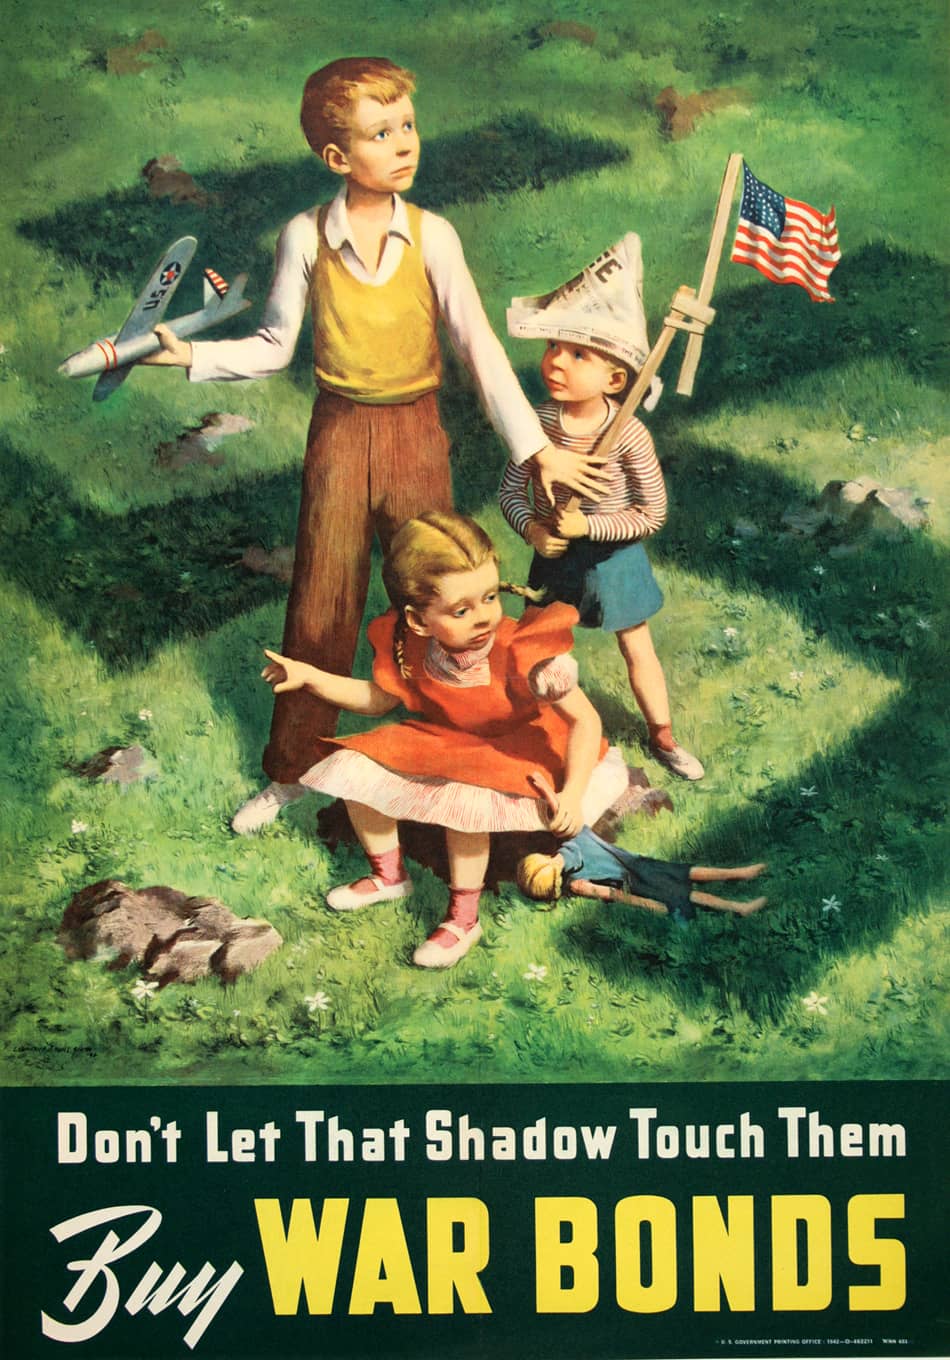 Original WWII American Poster 1942 by Dan Smith - Don't Let That Shadow Touch Them